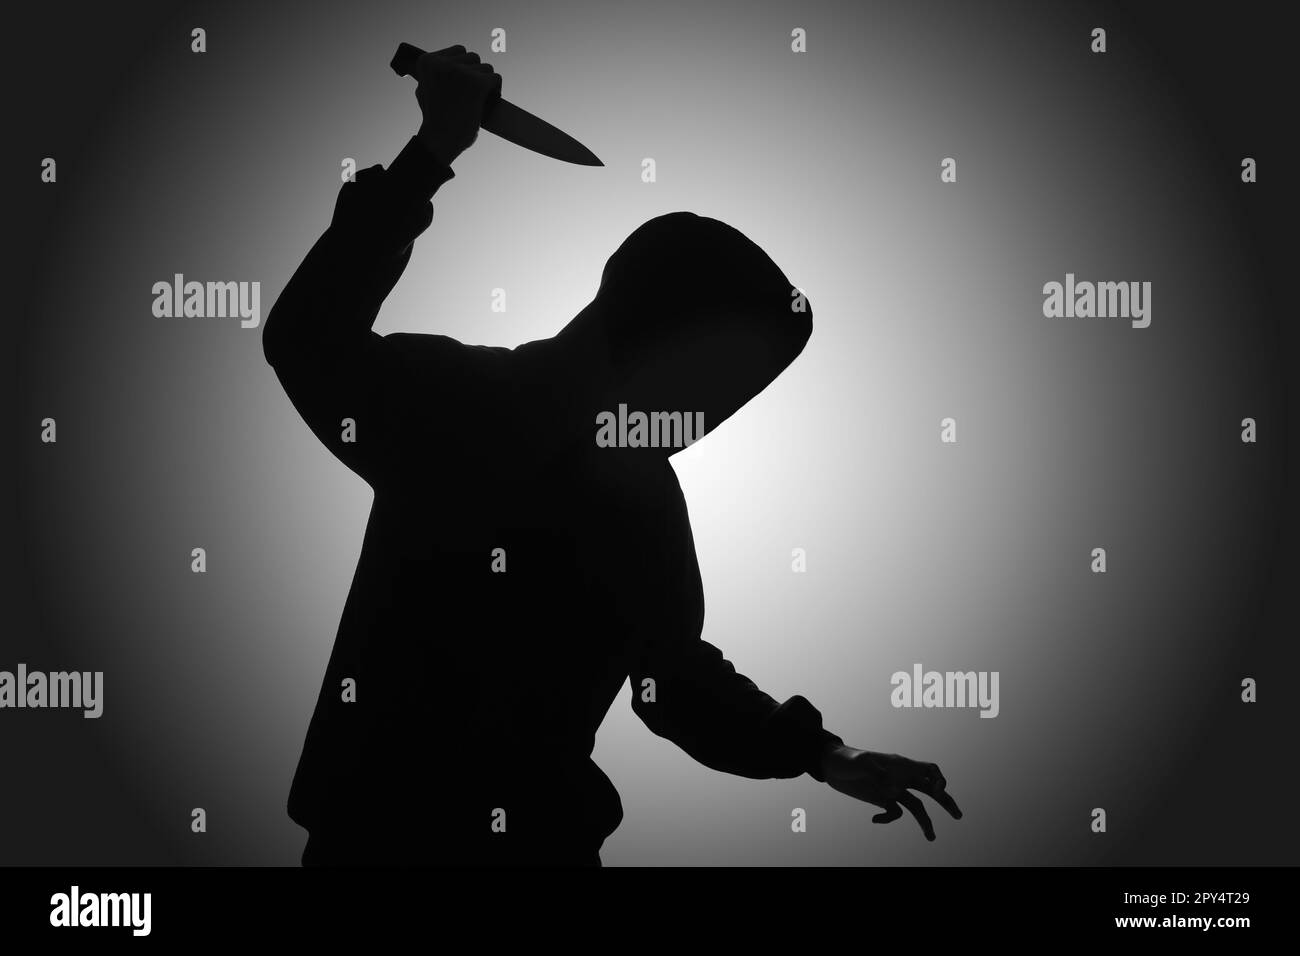 Mysterious man wearing black hoodie holding a knife to stab someone. Crimes and criminality concept Stock Photo